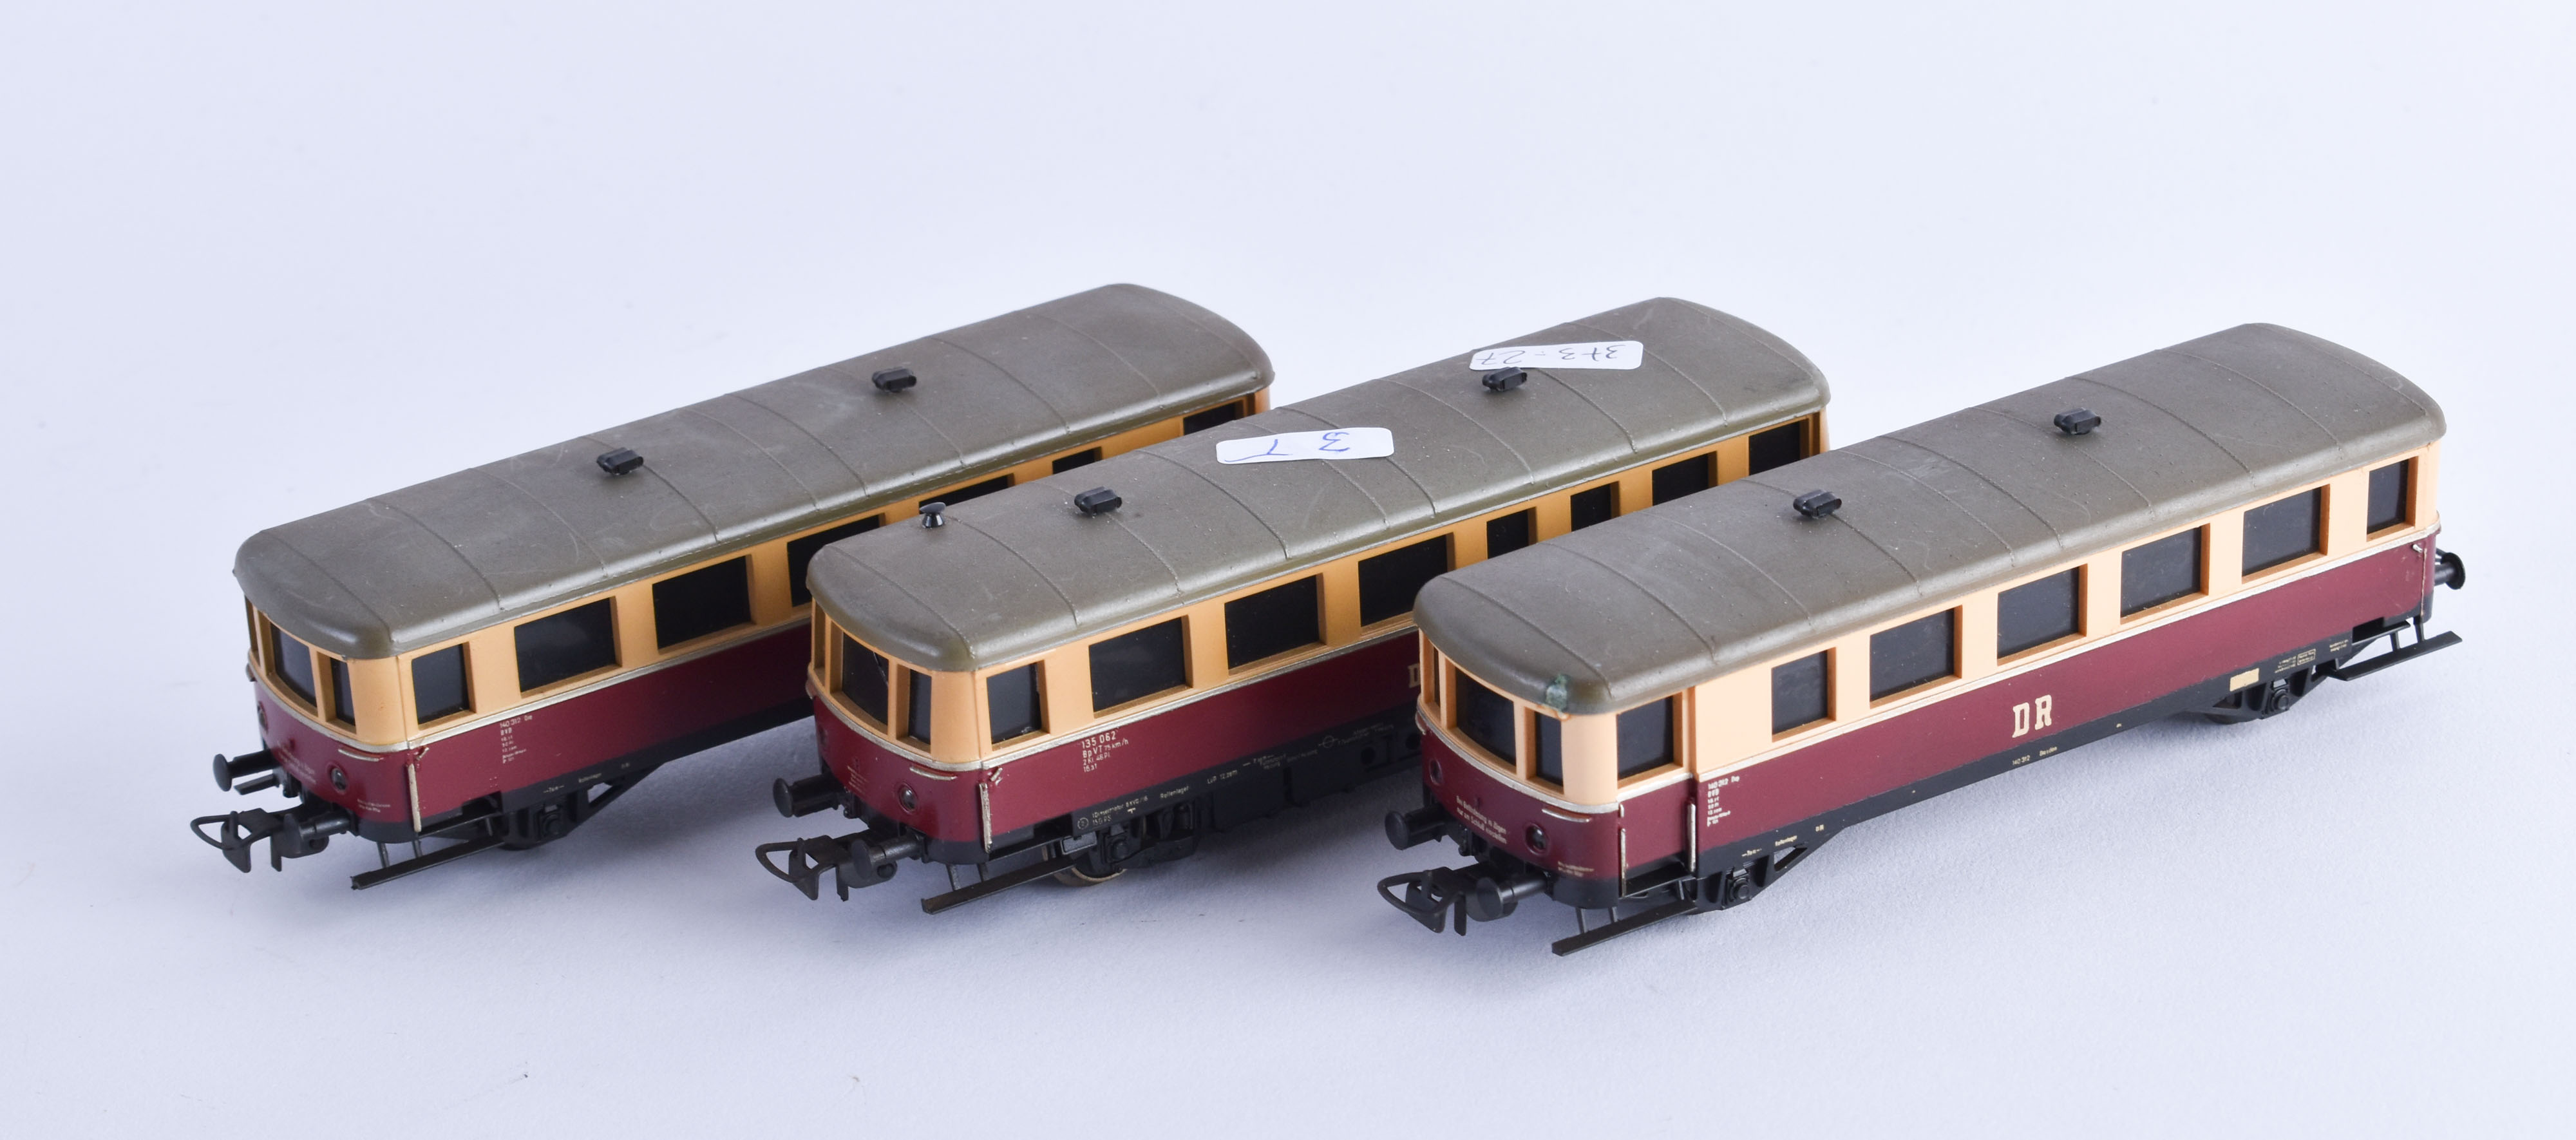 PIKO model of the VT 135 062 with 2 side wagons probably 1963